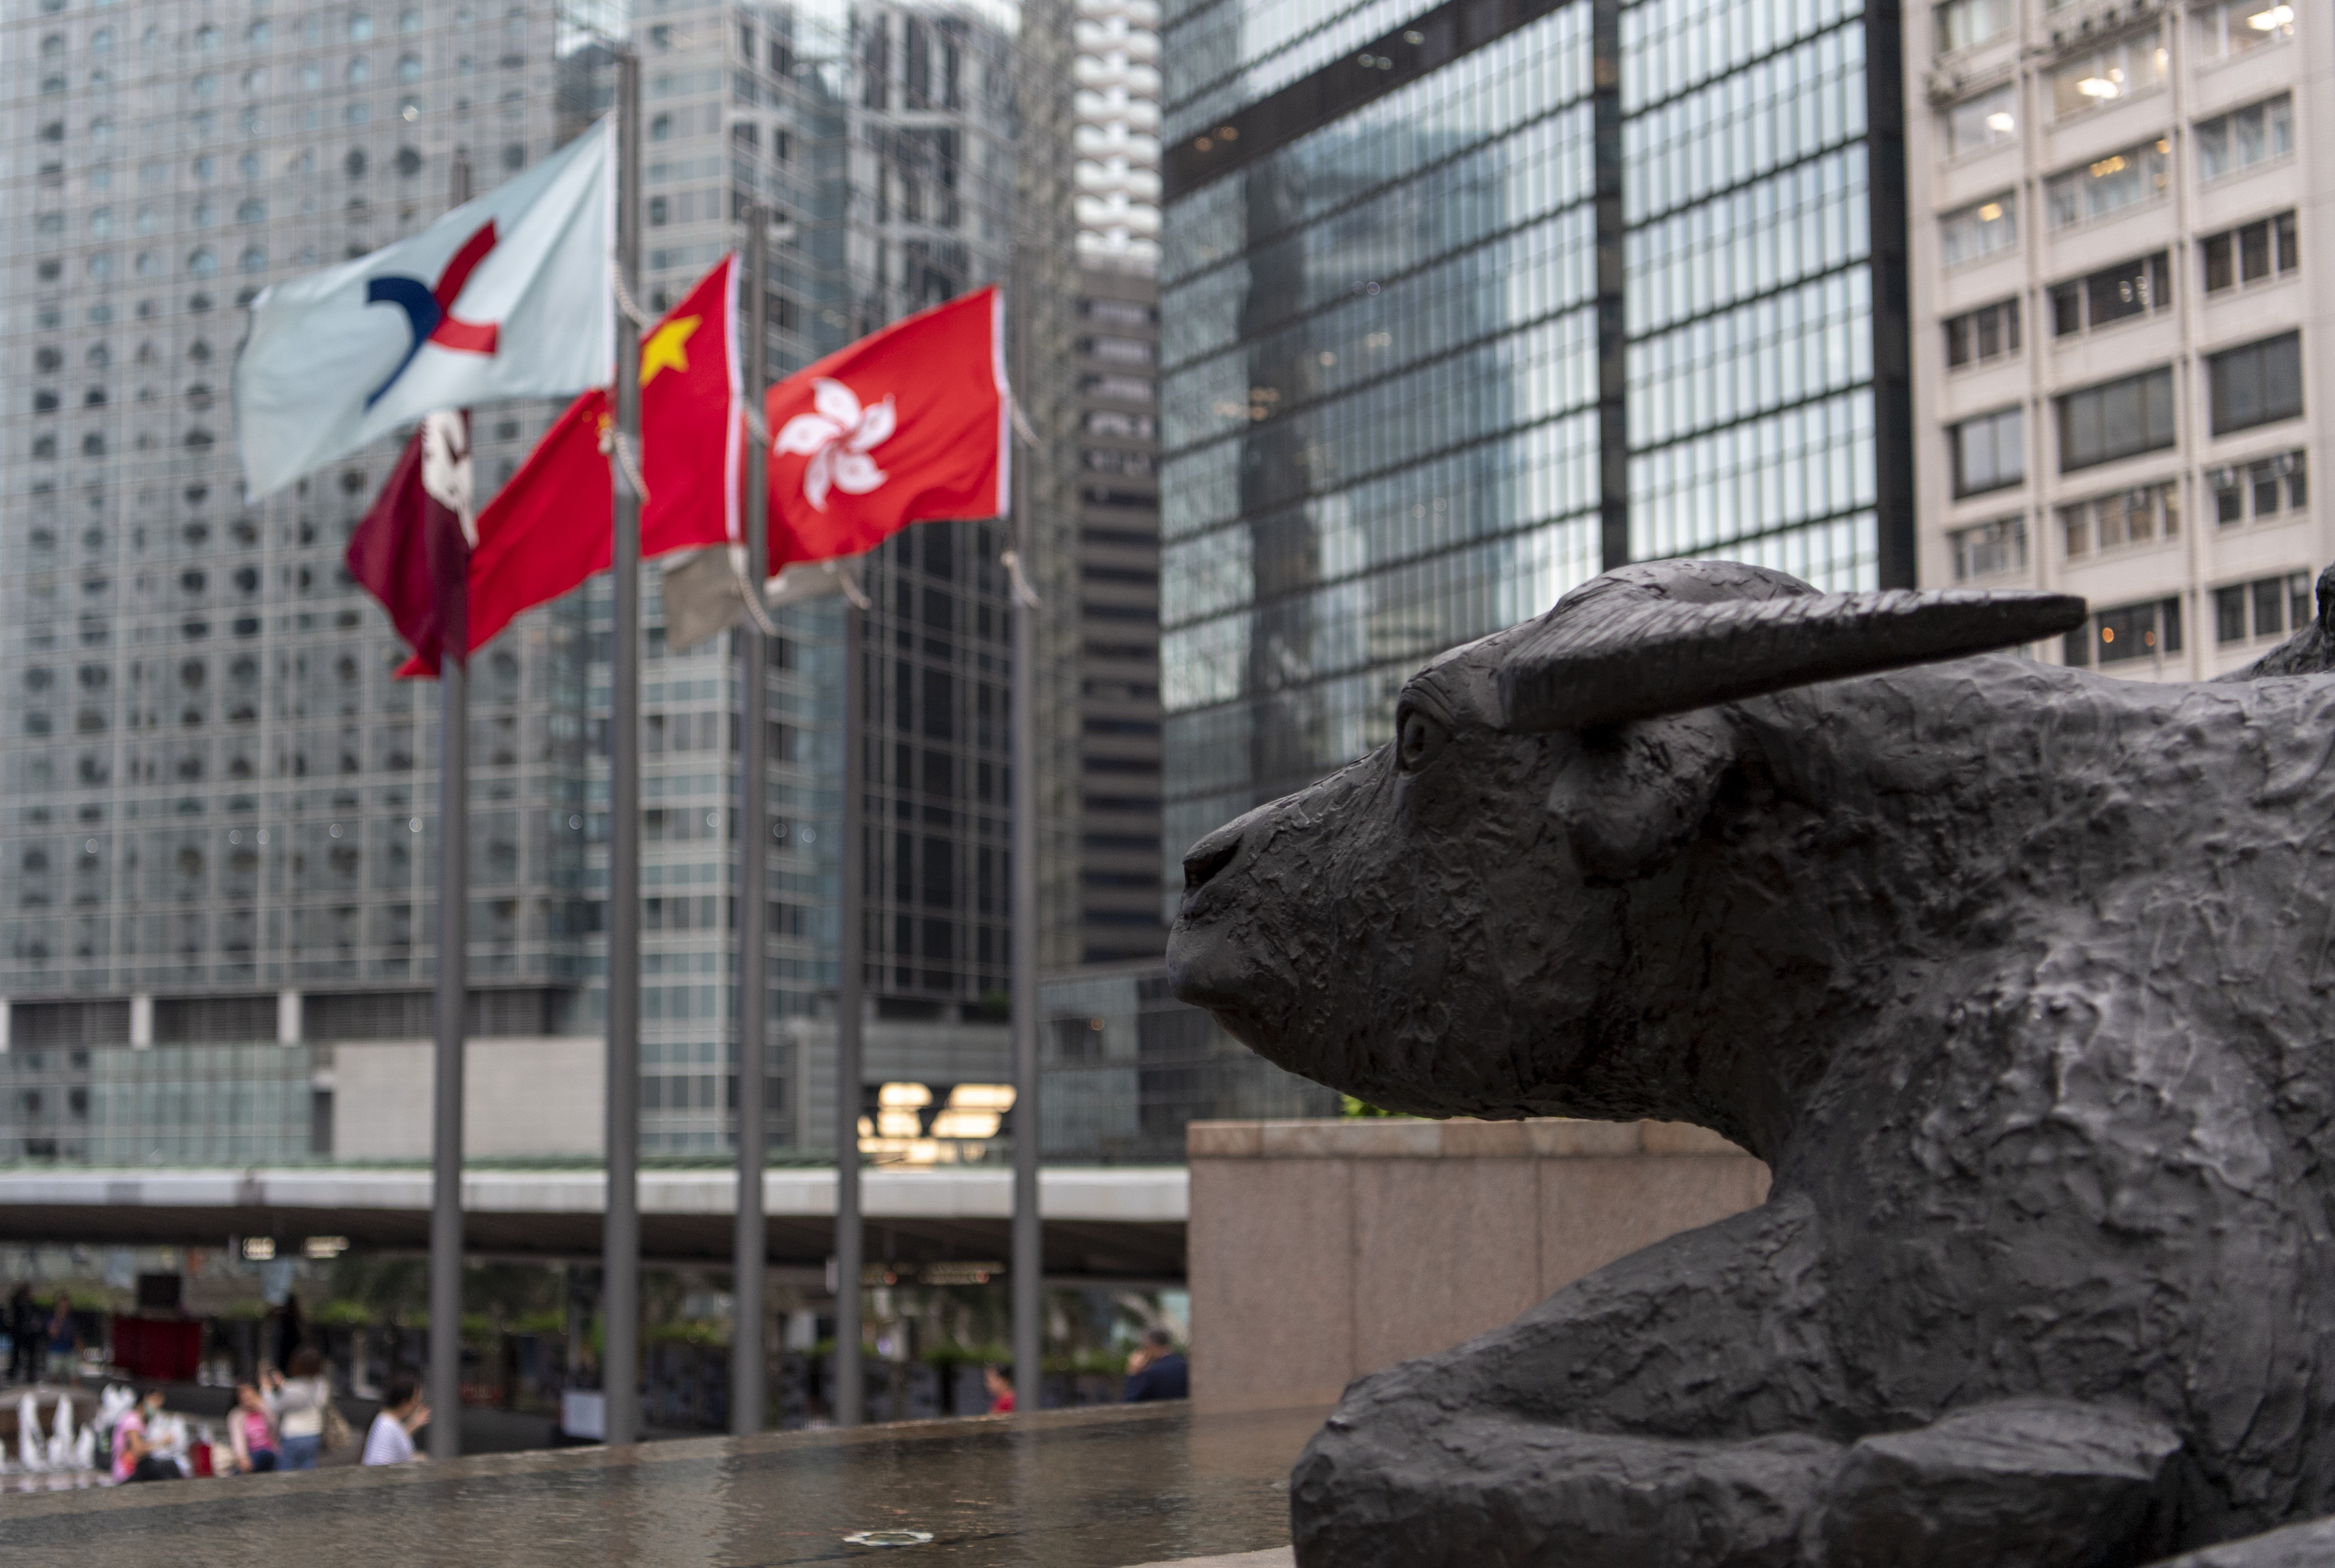 A bronze sculpture of a bull looks over Exchange Square in Central where Hong Kong’s stock exchange stands. Hong Kong’s position as the most important financial market in Asia relies on freedom of information. Photo: Warton Li